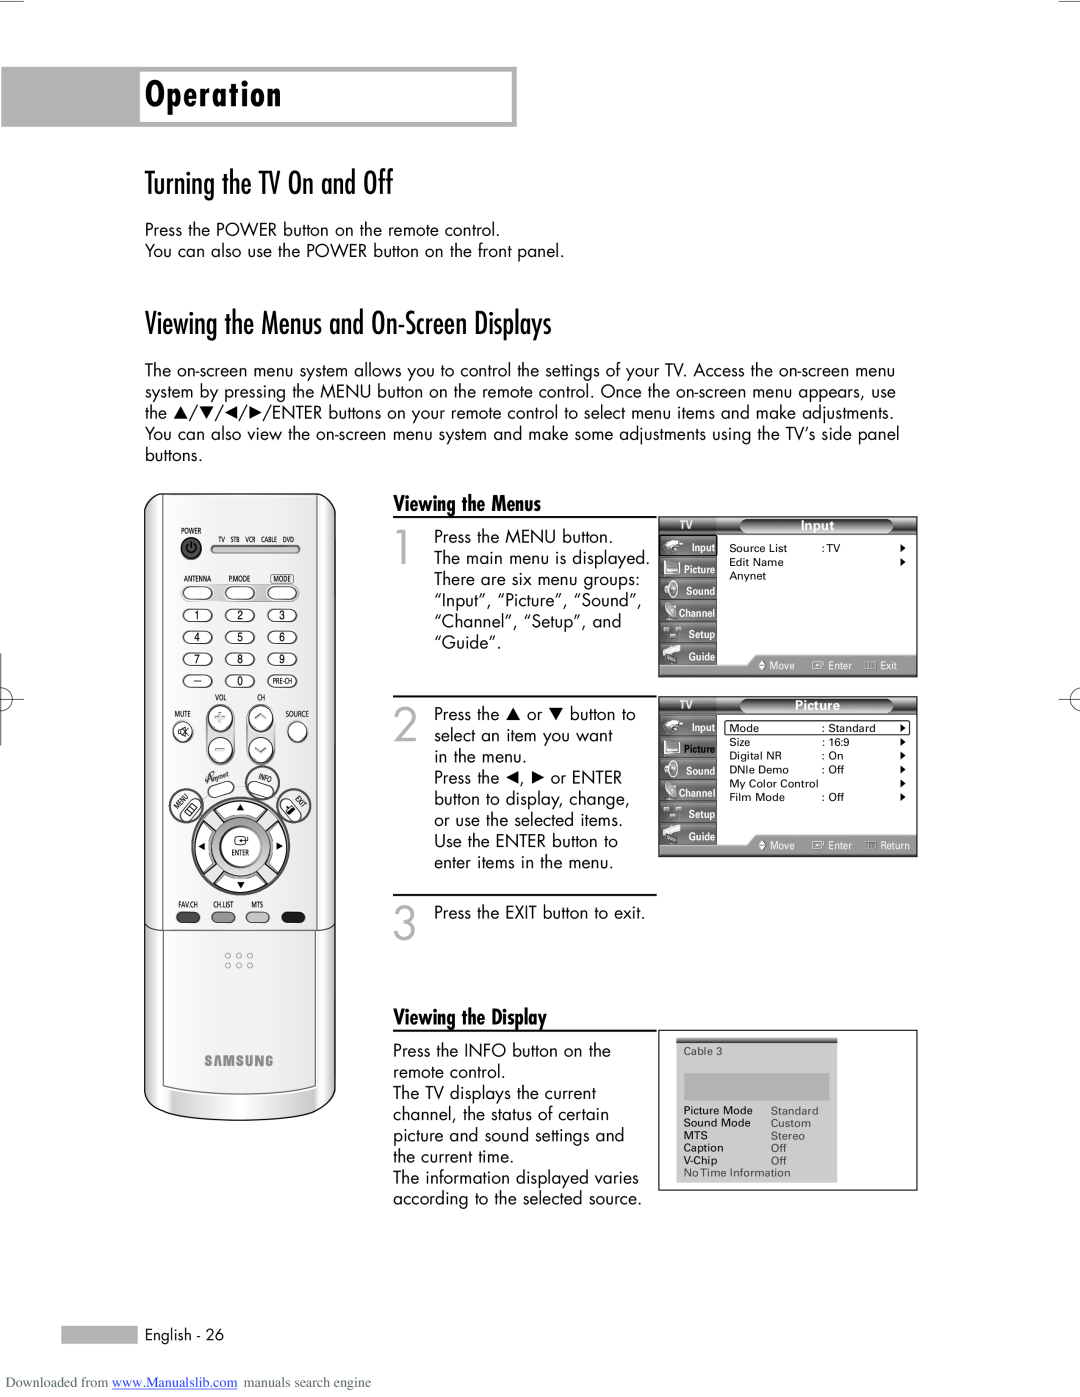 Samsung HL-R5056W Operation, Turning the TV On and Off, Viewing the Menus and On-Screen Displays, Viewing the Display 